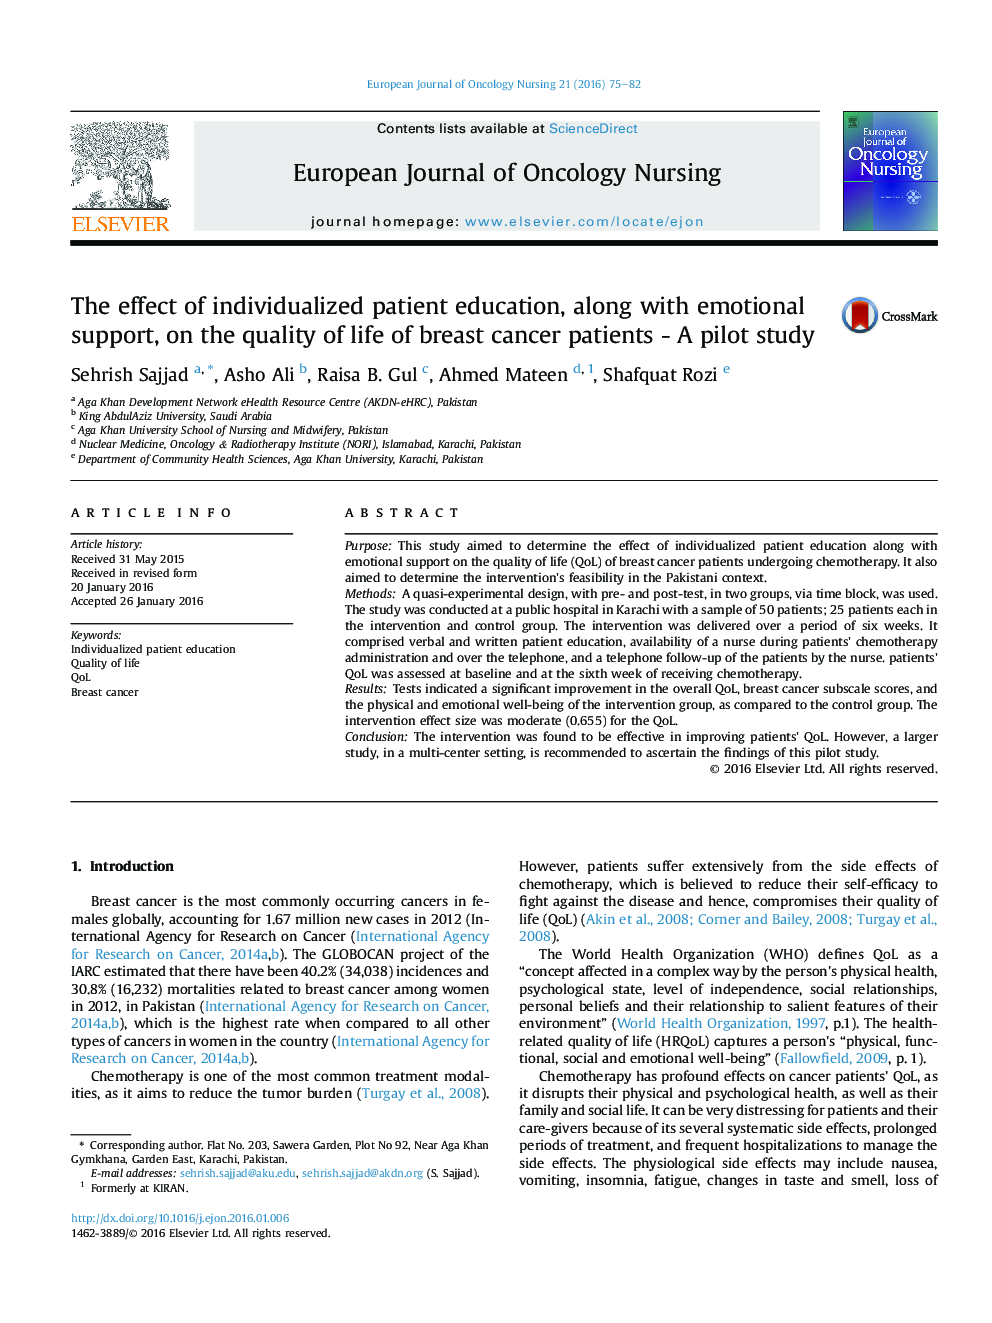 The effect of individualized patient education, along with emotional support, on the quality of life of breast cancer patients - A pilot study